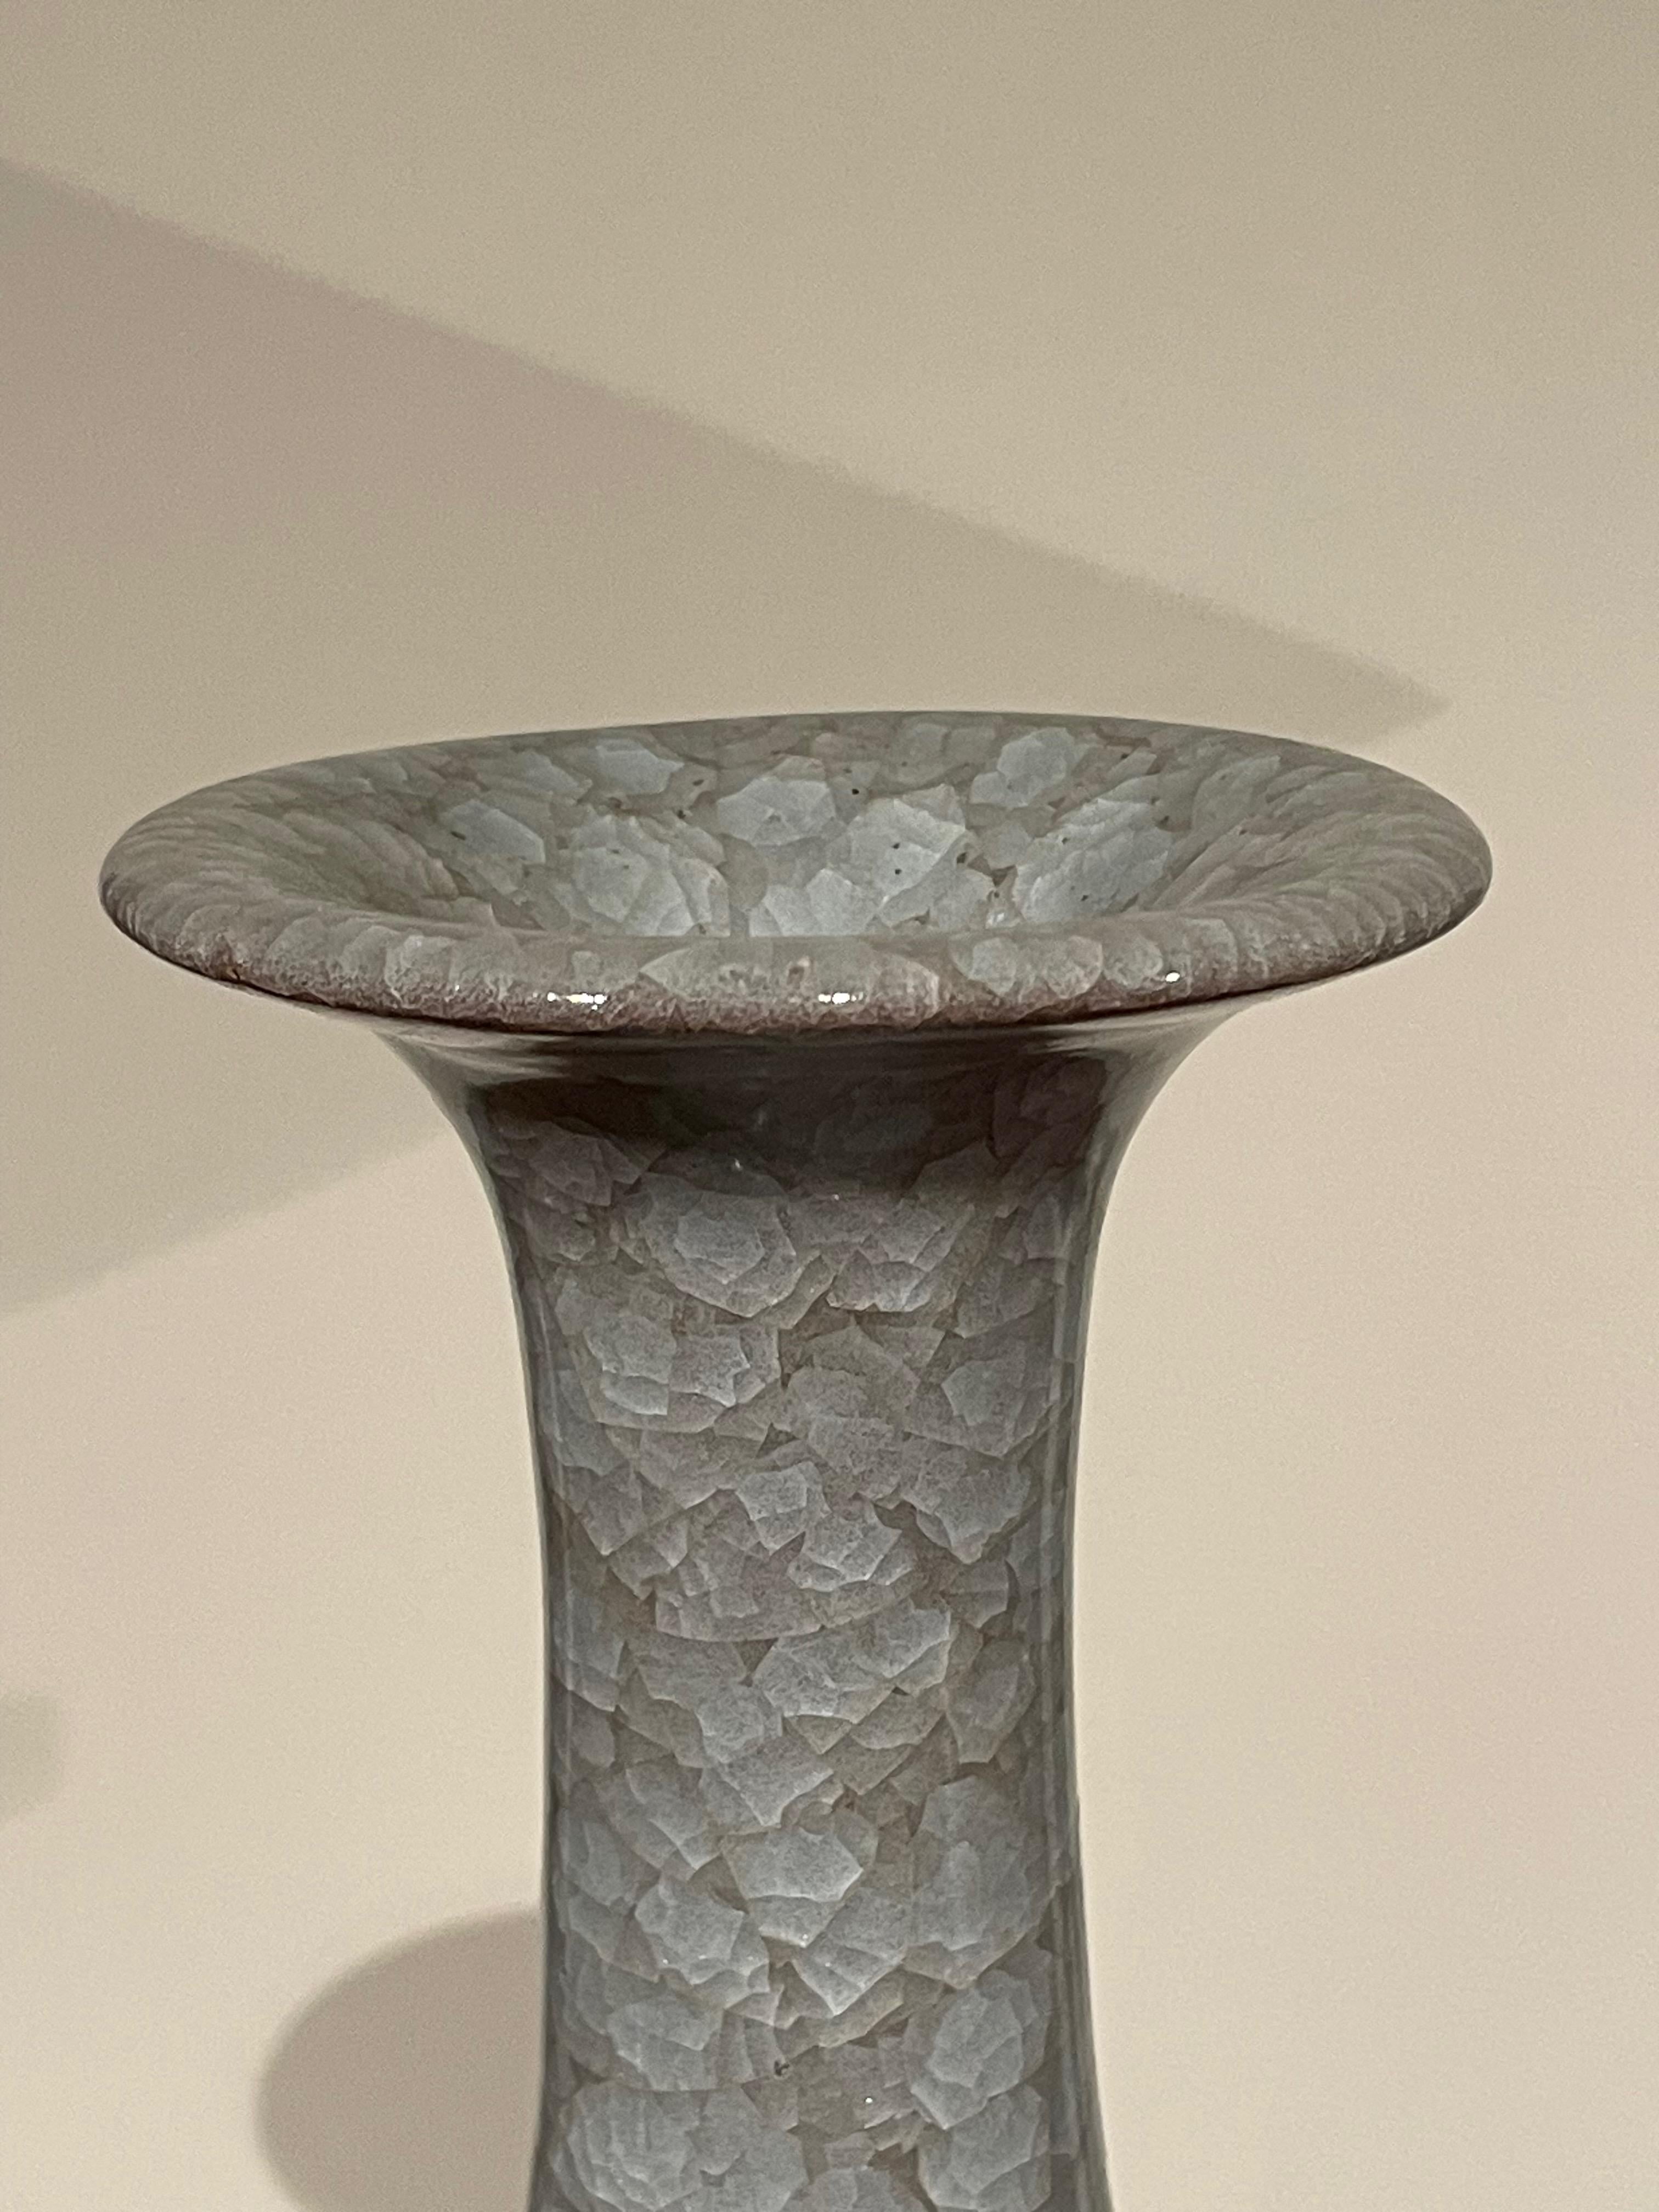 Contemporary Chinese blue vase with crackle glaze.
Elongated tubular neck.
From a large collection with varying shapes and sizes.
